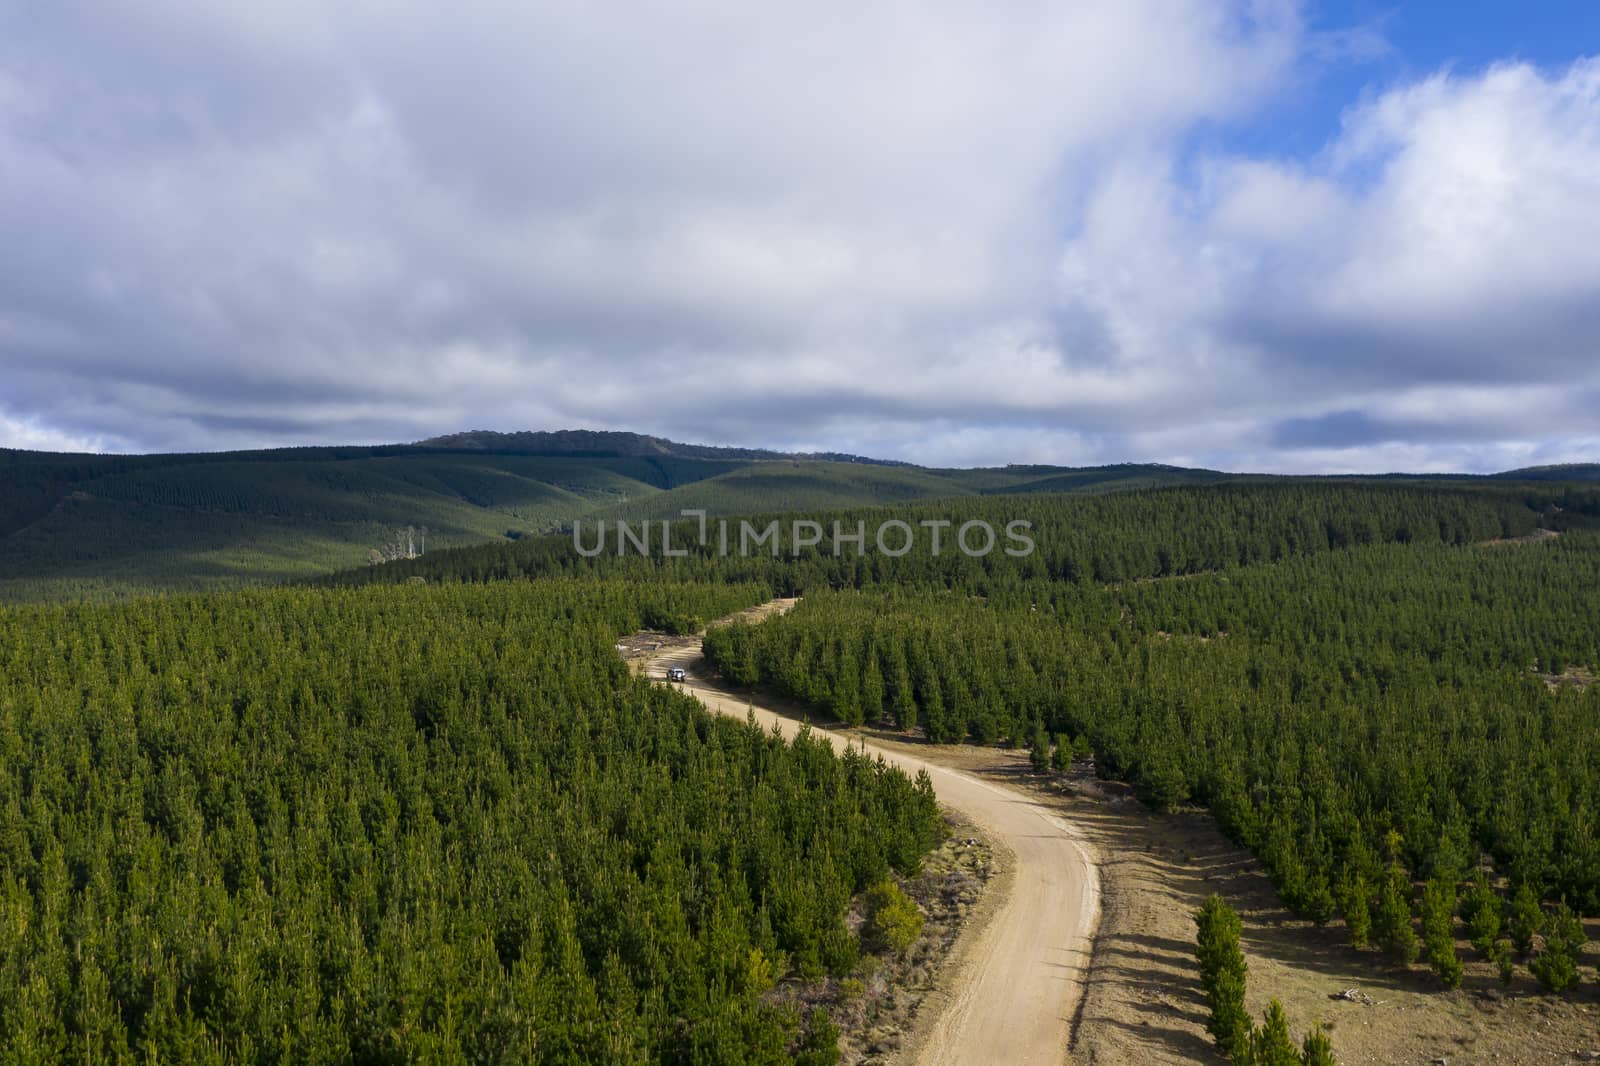 A car driving on a dirt road through a pine forest in regional Australia by WittkePhotos